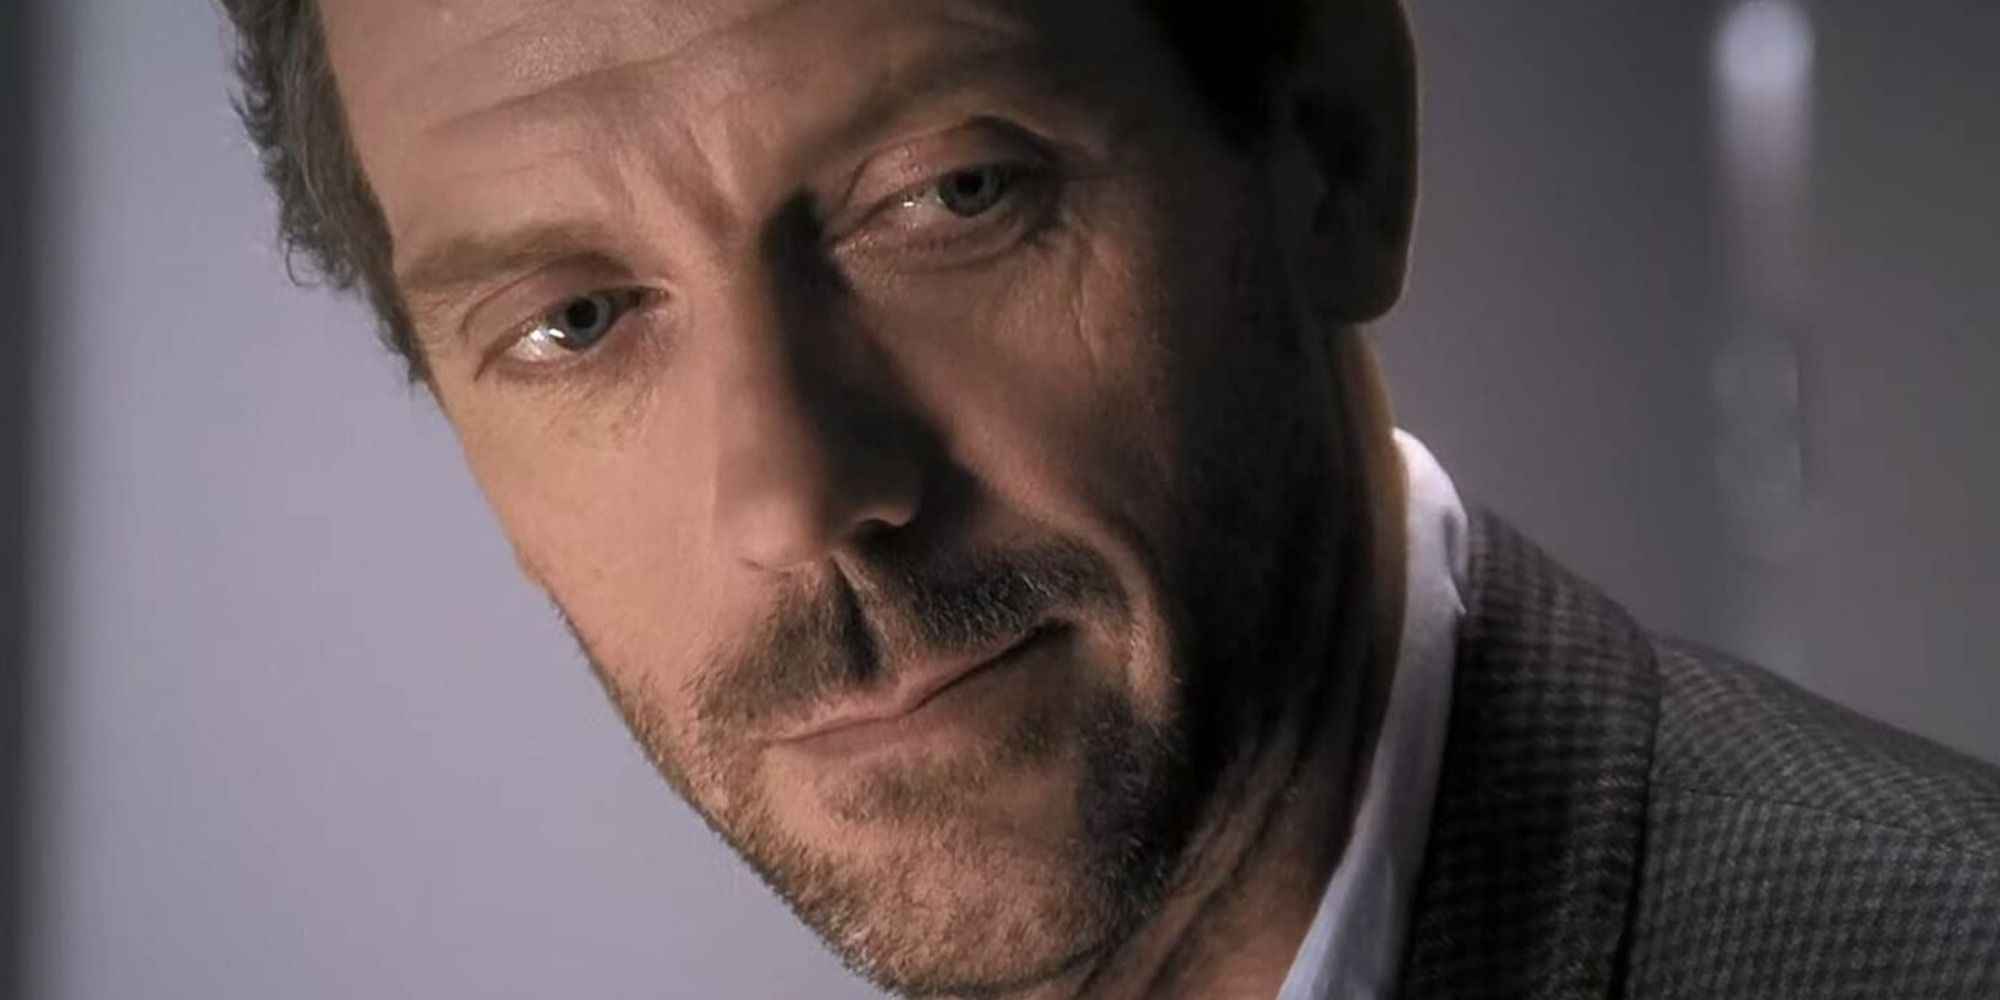 Gregory House looking down smiling